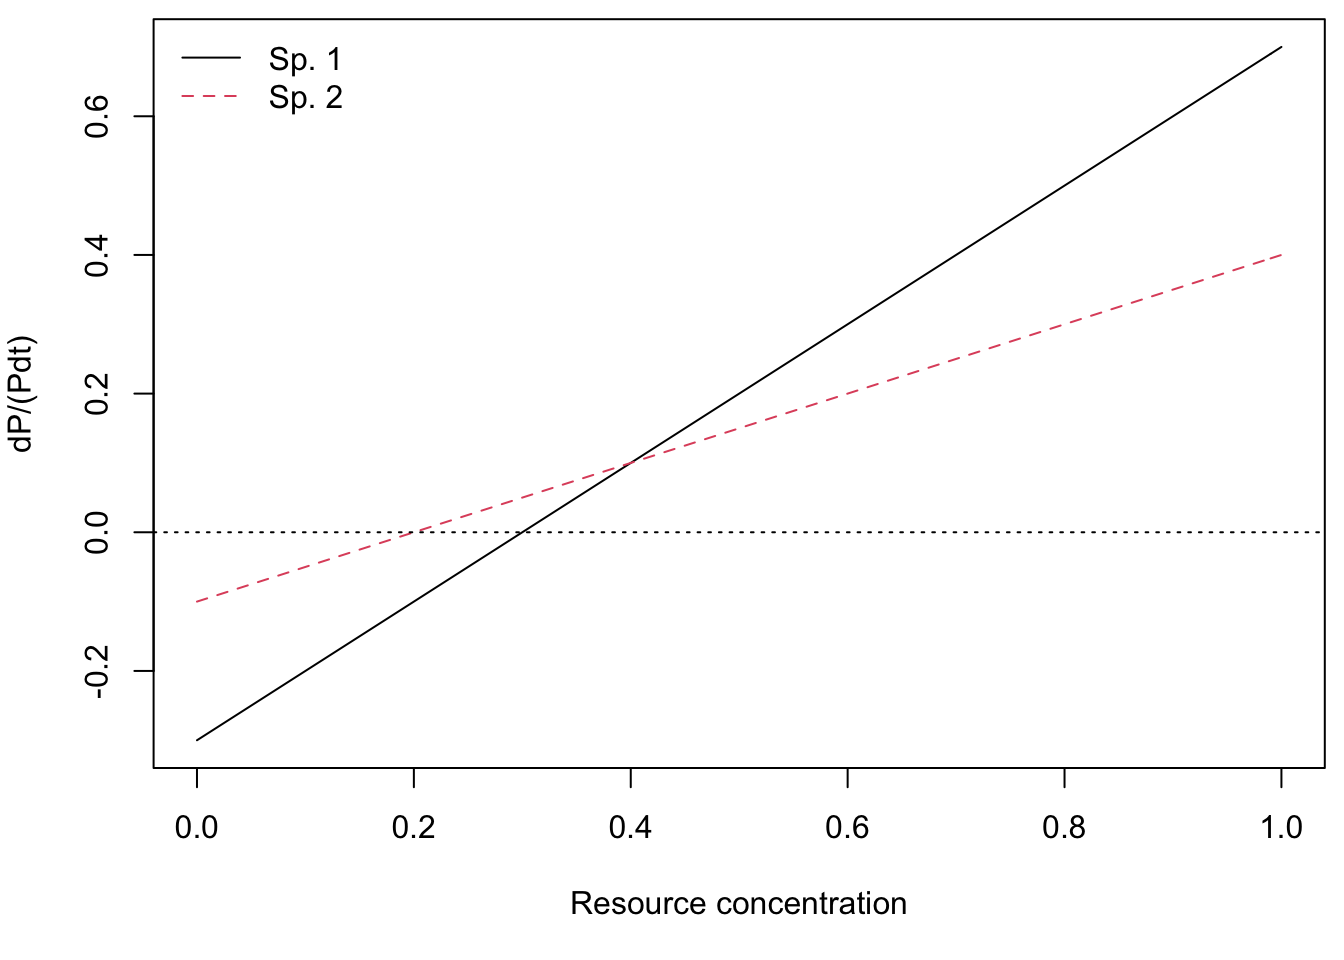 *Mass-specific growth rates of two species across a range of resource concentrations.*